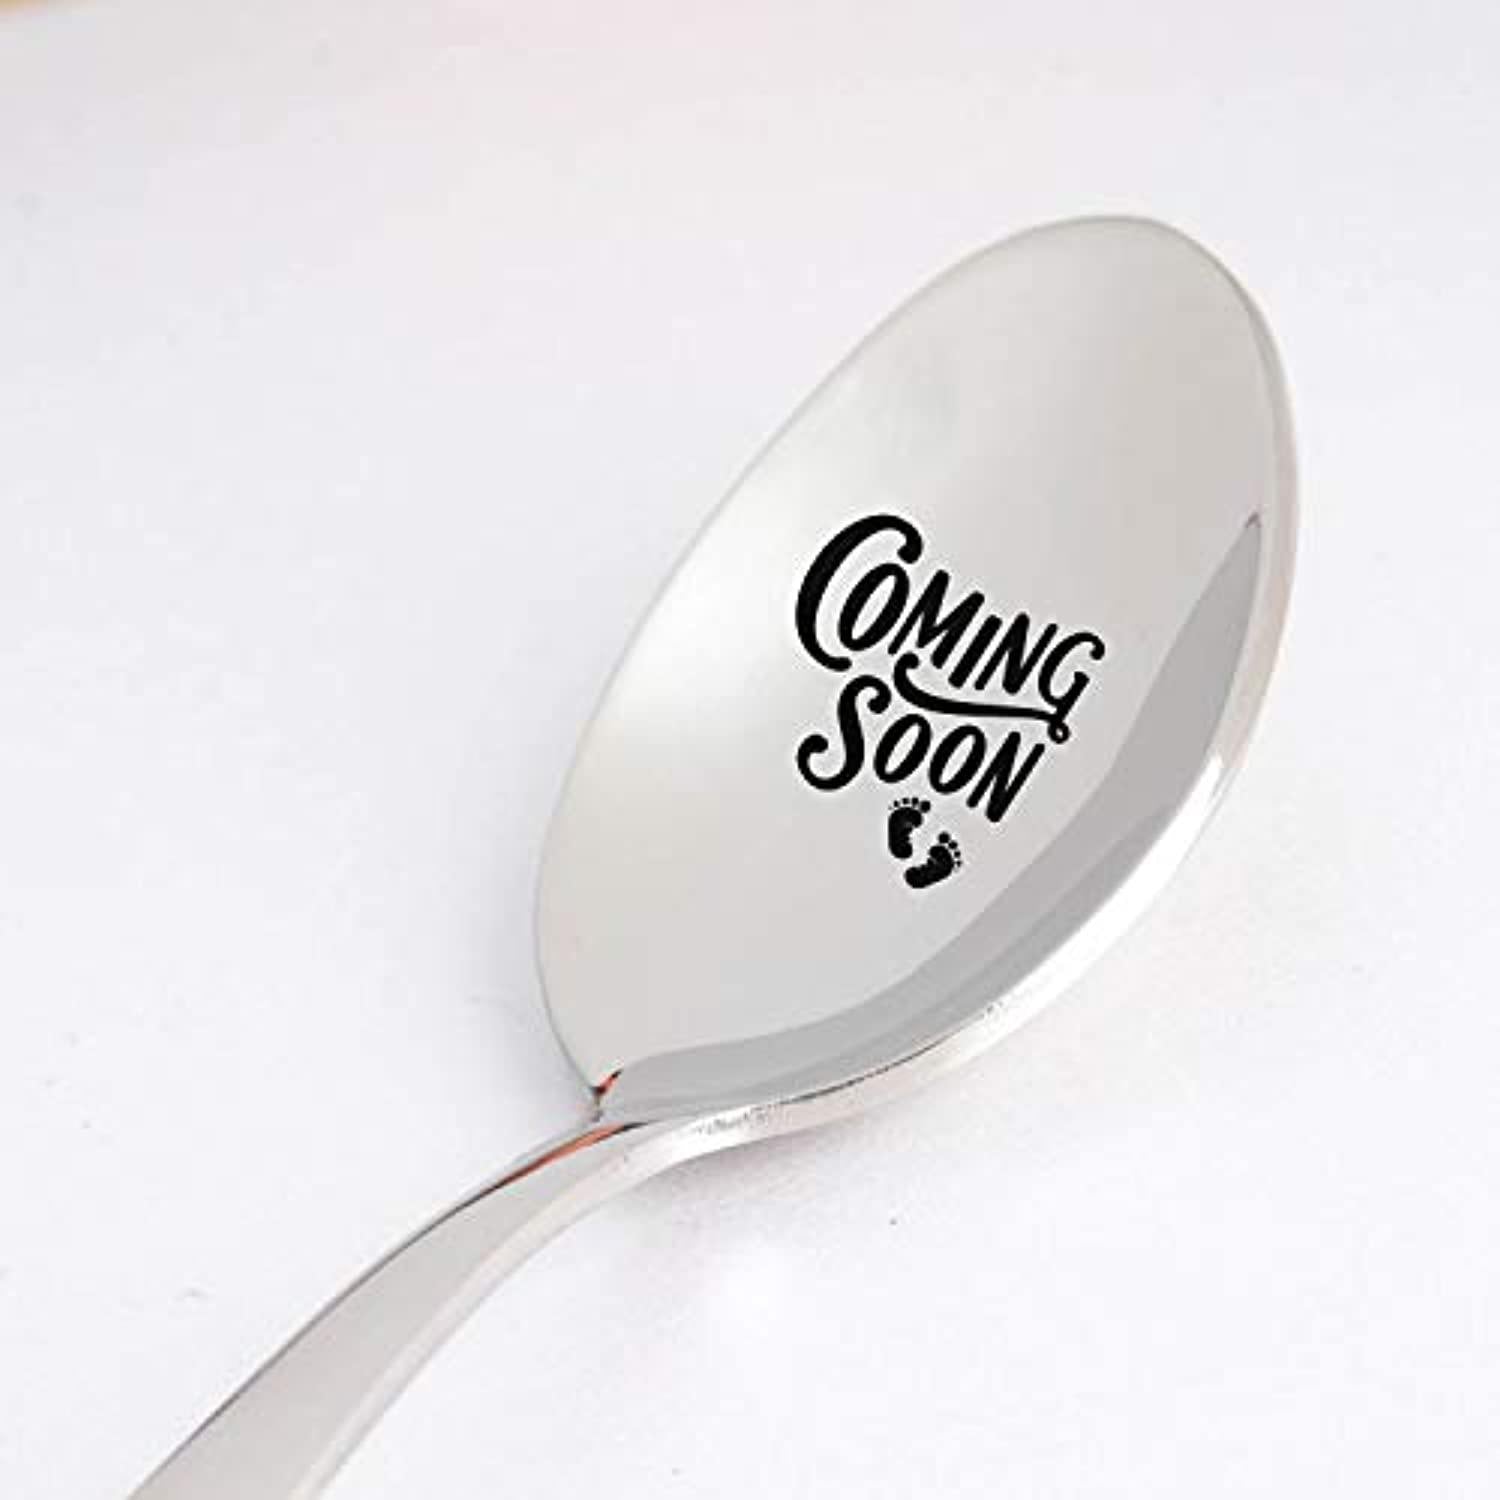 New Baking Buddy Cooking Partner Partner in Crime Hand Stamped Spoon  Personalized Pregnancy Announcement and Pregnancy Reveal Spoons 